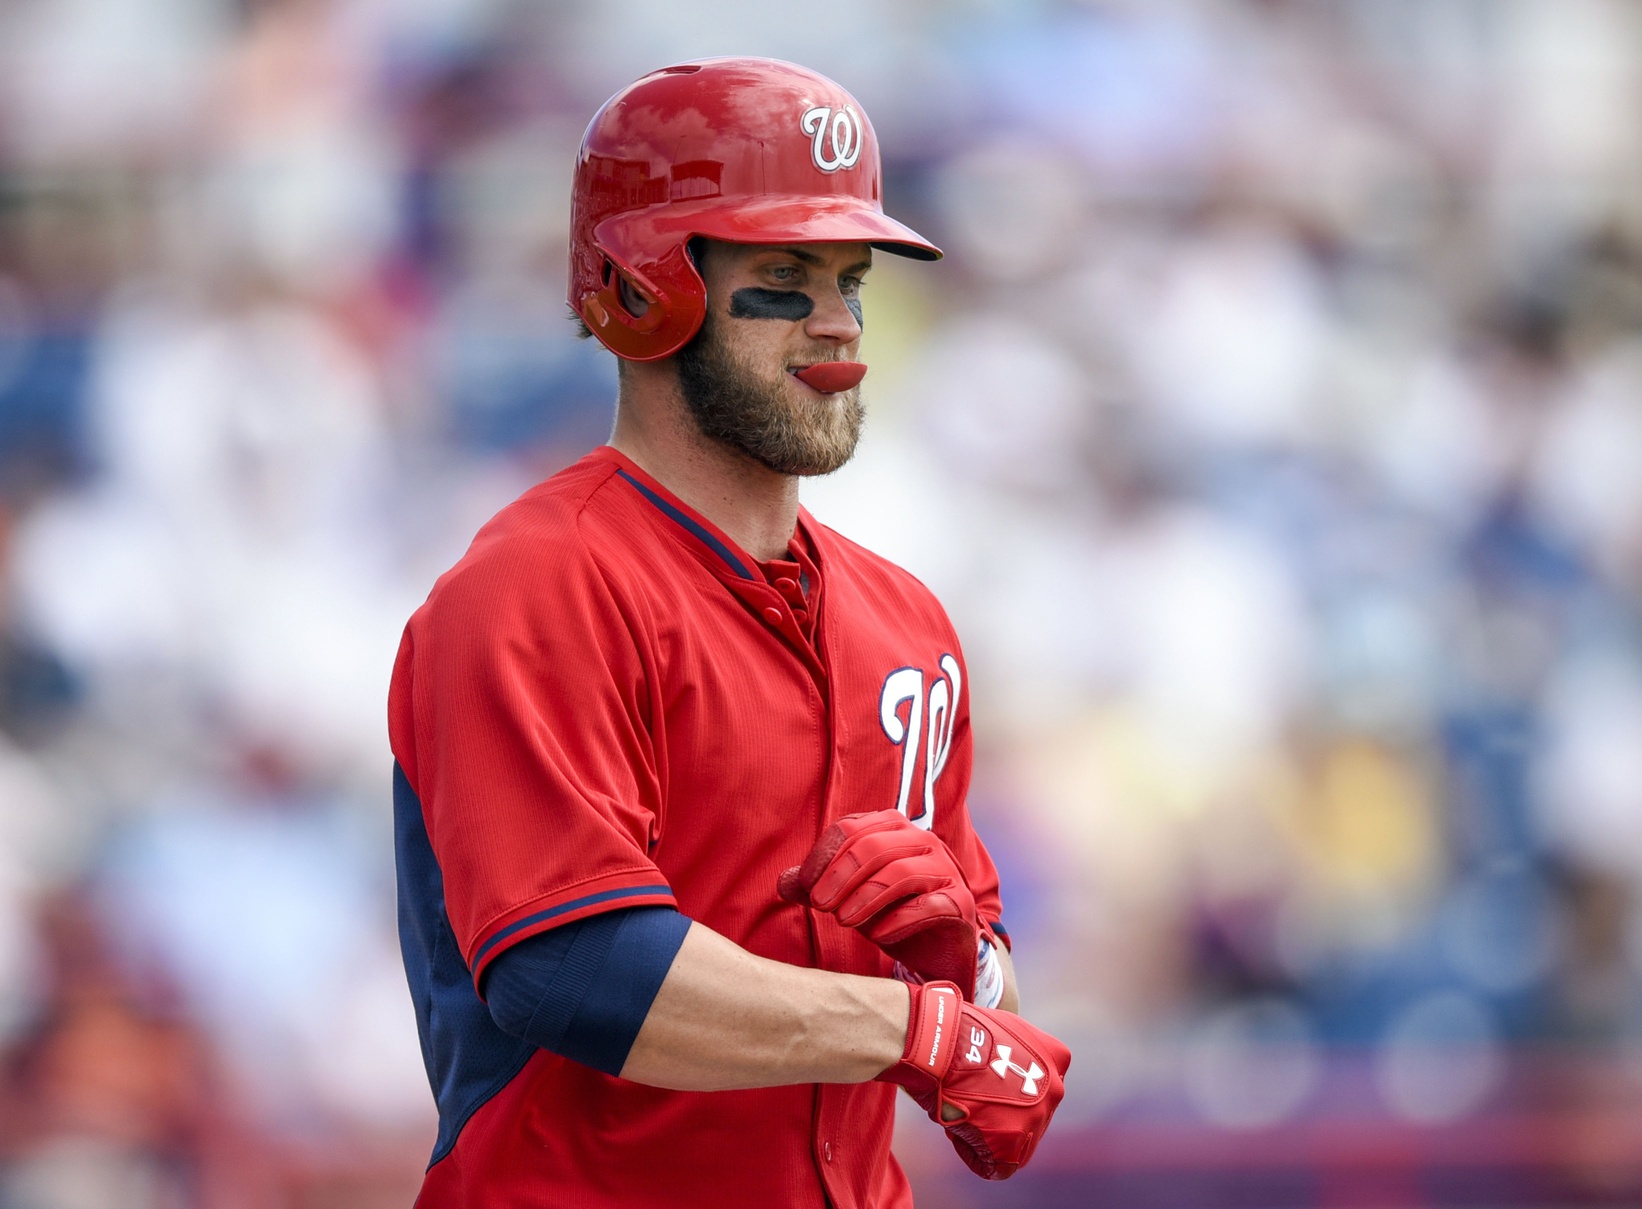 Bryce Harper's sneaky play was awesome and he should definitely do